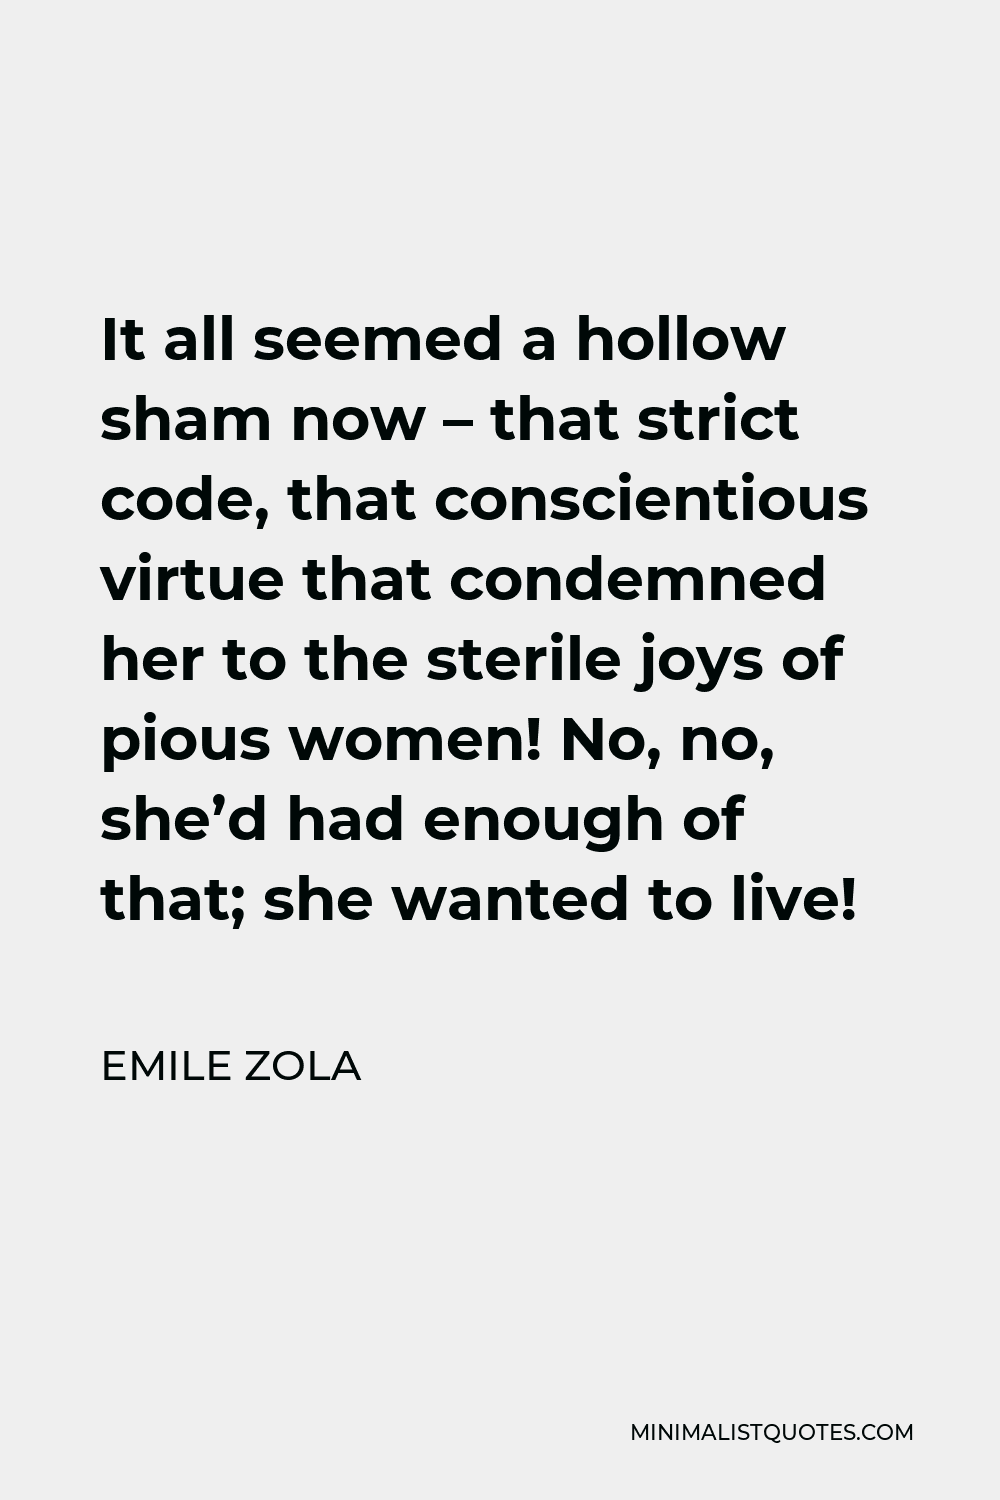 Emile Zola Quote - It all seemed a hollow sham now – that strict code, that conscientious virtue that condemned her to the sterile joys of pious women! No, no, she’d had enough of that; she wanted to live!